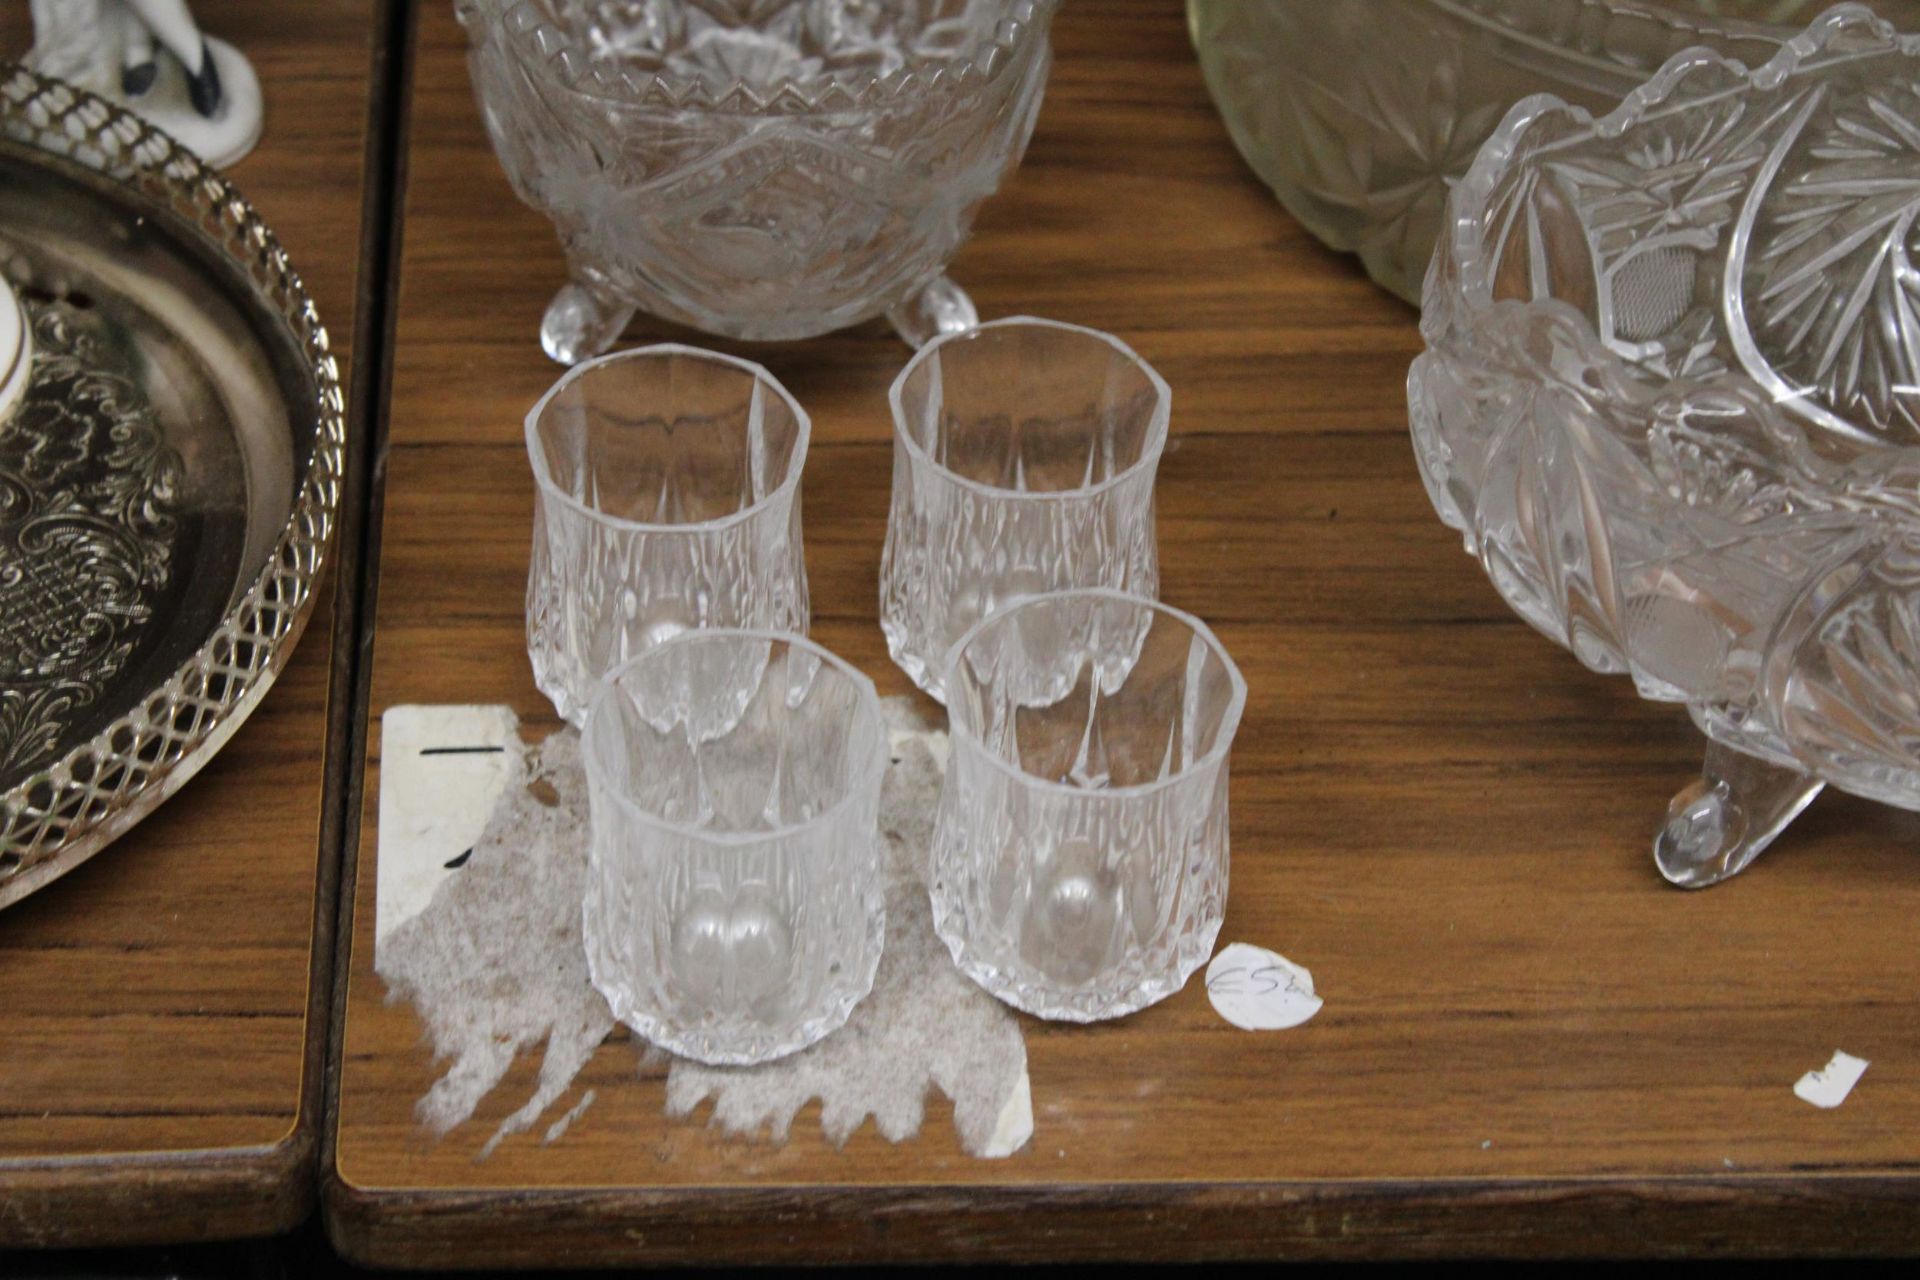 A QUANTITY OF GLASSWARE TO INCLUDE DECANTERS, BOWLS, BELLS, GLASSES, ETC - Image 2 of 3